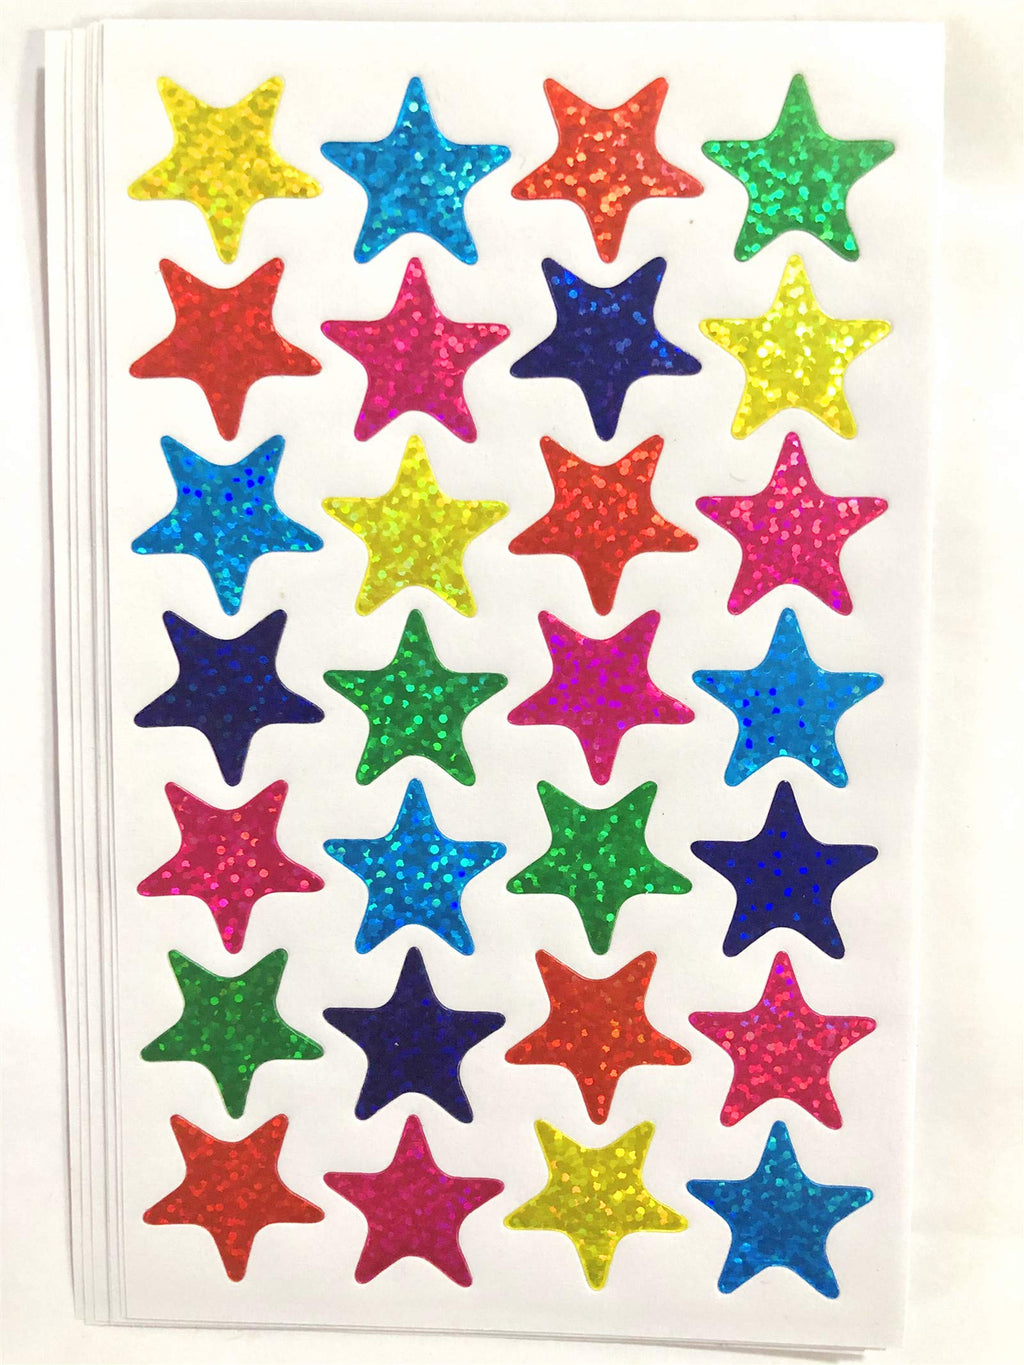  [AUSTRALIA] - Autupy 40 Sheets 1120 Pieces 2.2 cm (0.87 inch) Laser Shiny Sparkle Star Stickers Reward Star Stickers,Self Adhesive Star Stickers,Labels for Home,School,Bar,DIY and Office Decoration